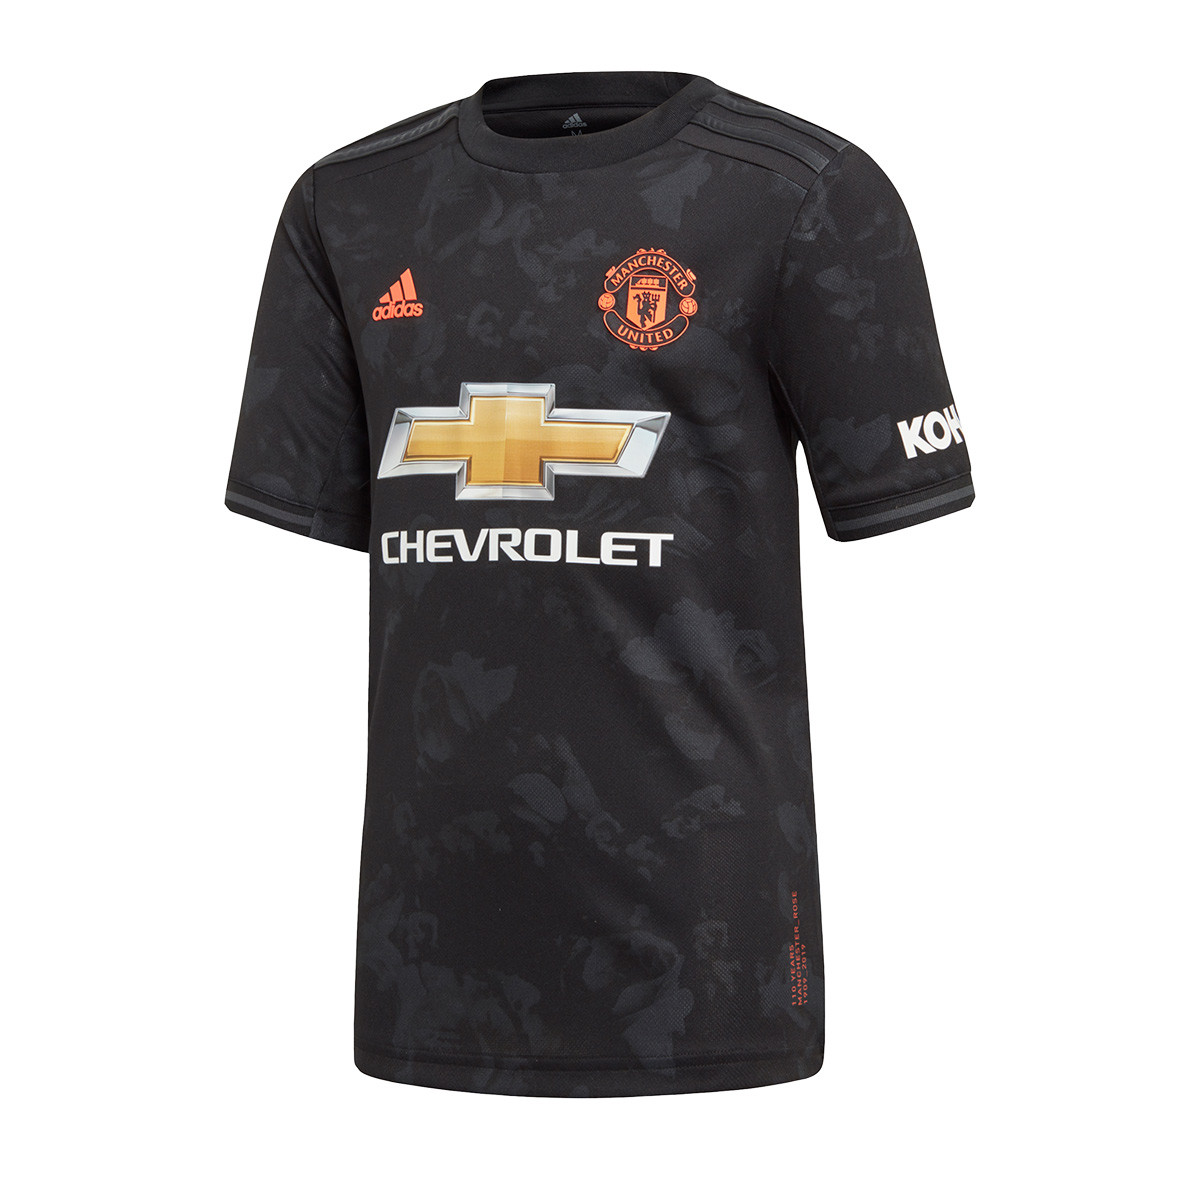 manchester united football jersey